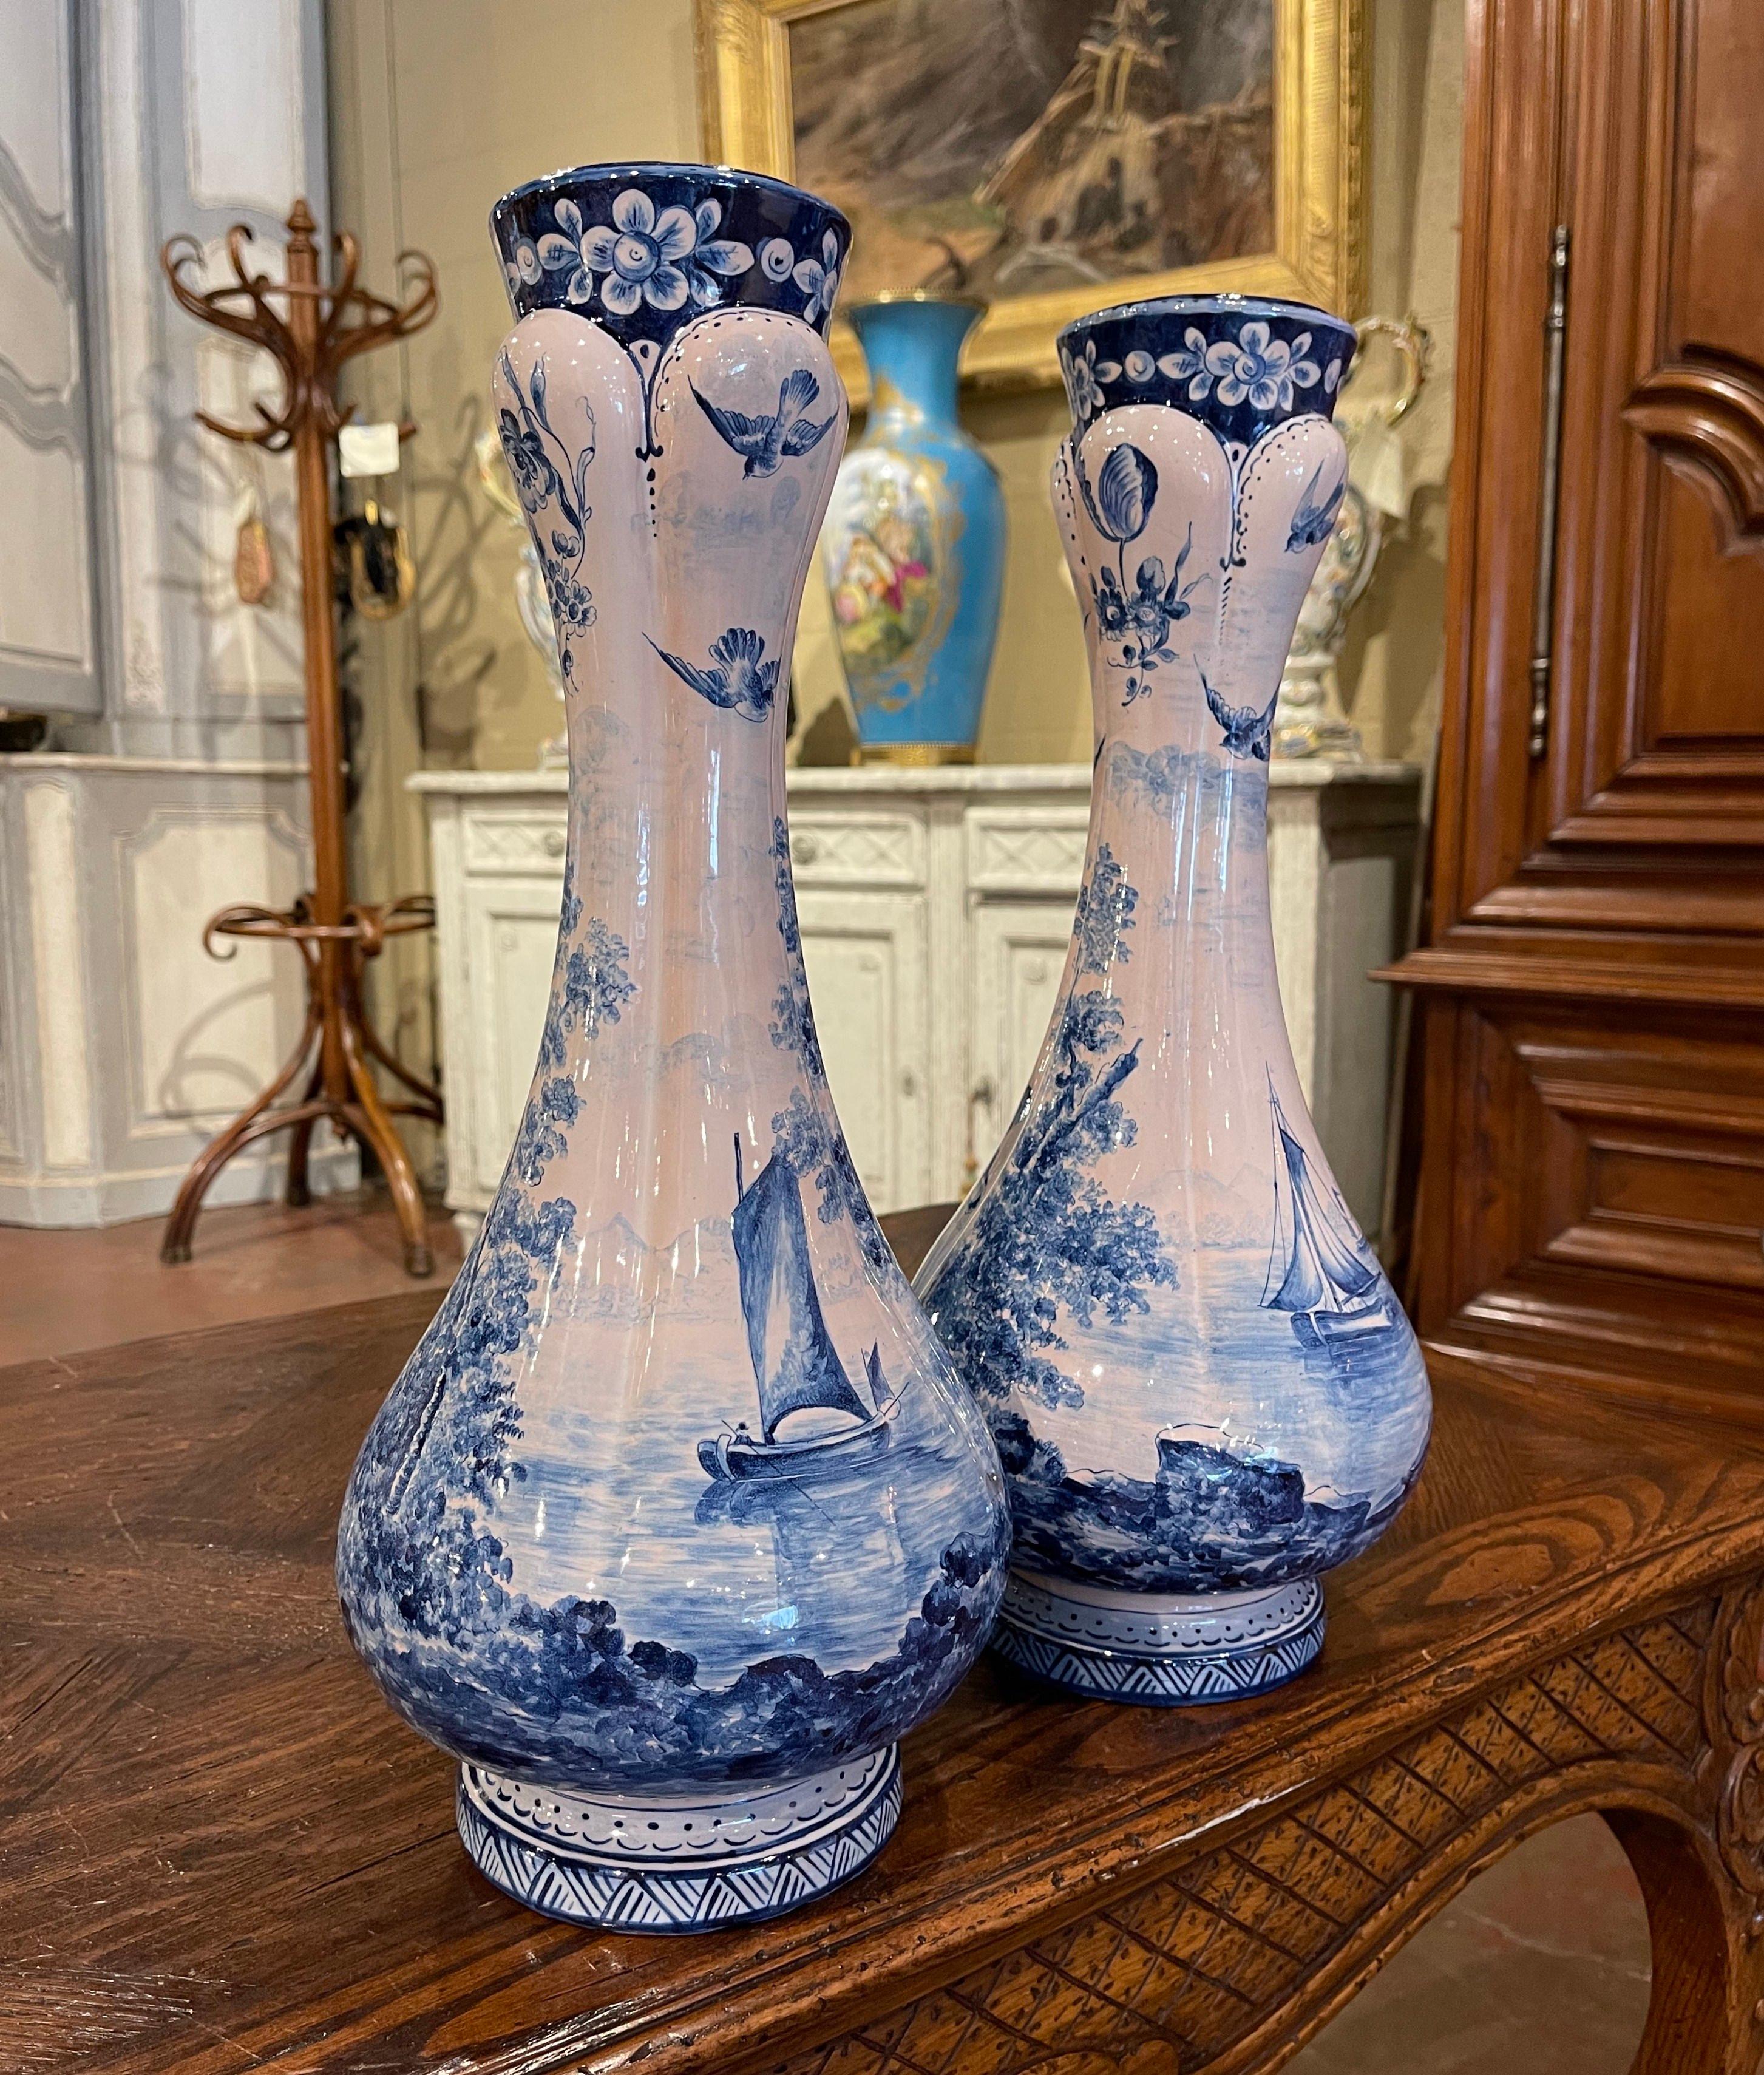 Decorate a shelf or console table with this elegant pair of antique faience vases. Crafted in France circa 1880, both vases are round in shape with a long neck over a circular mouth. Each vessel is hand painted in the traditional soft blue and white